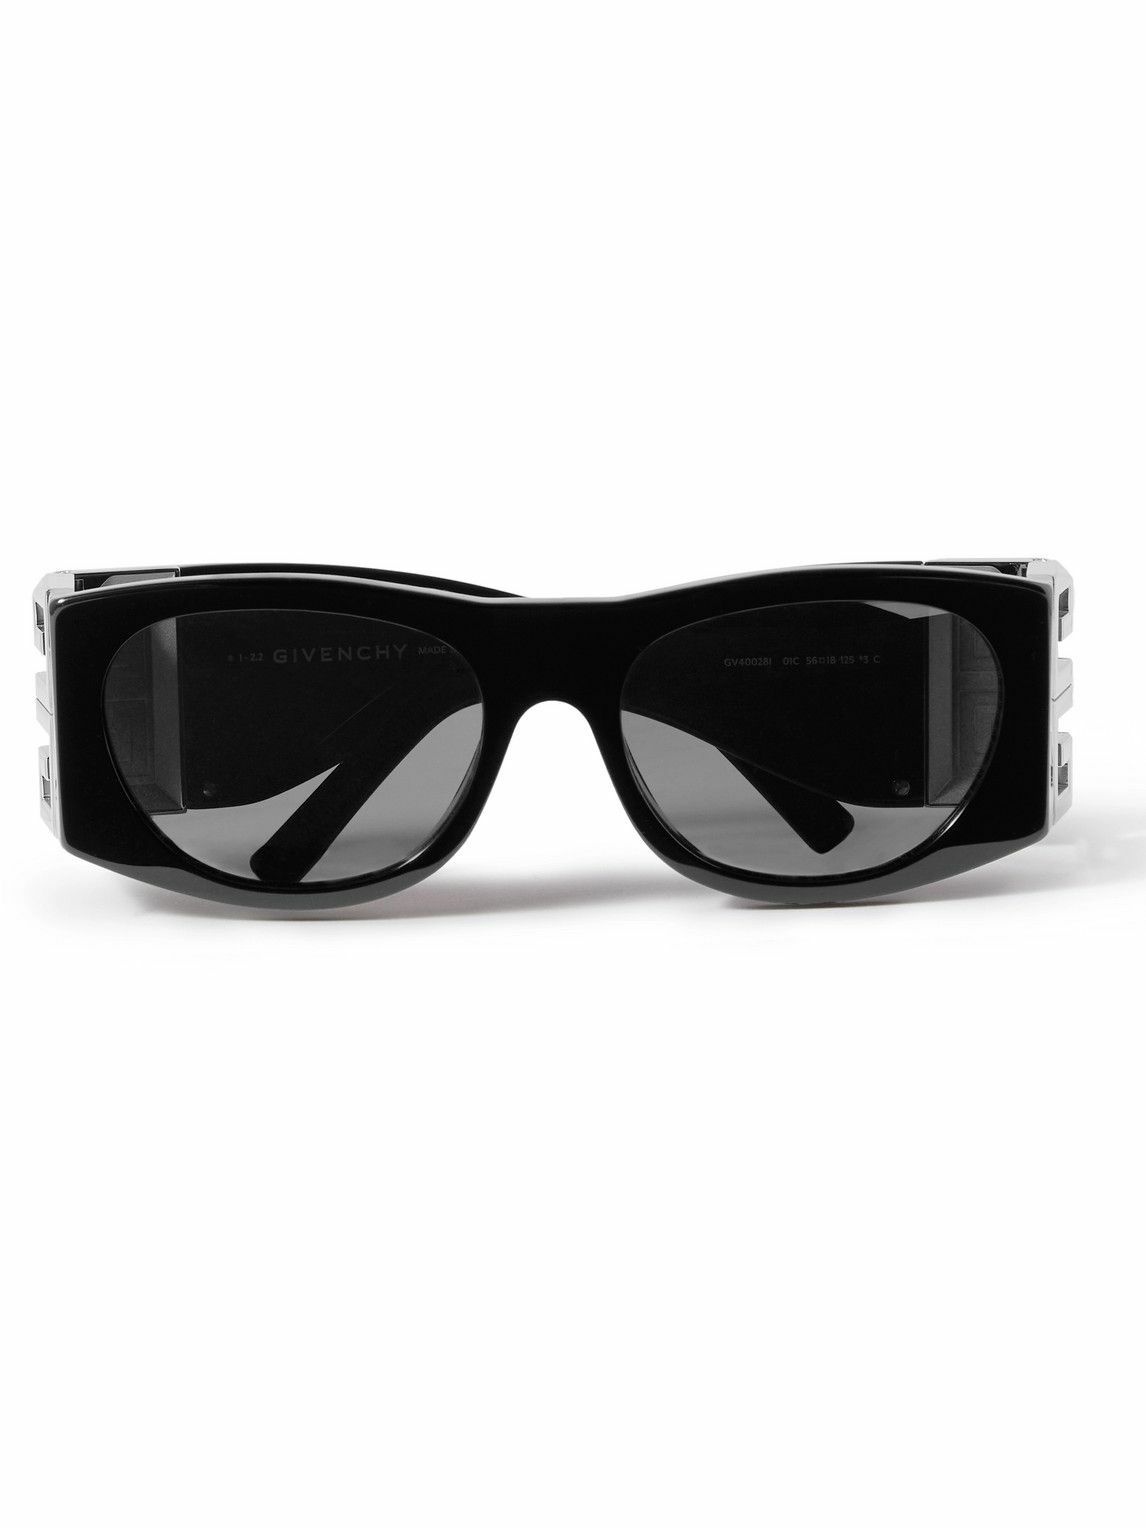 Givenchy - Rectangular-Frame Silver-Tone and Acetate Sunglasses Givenchy